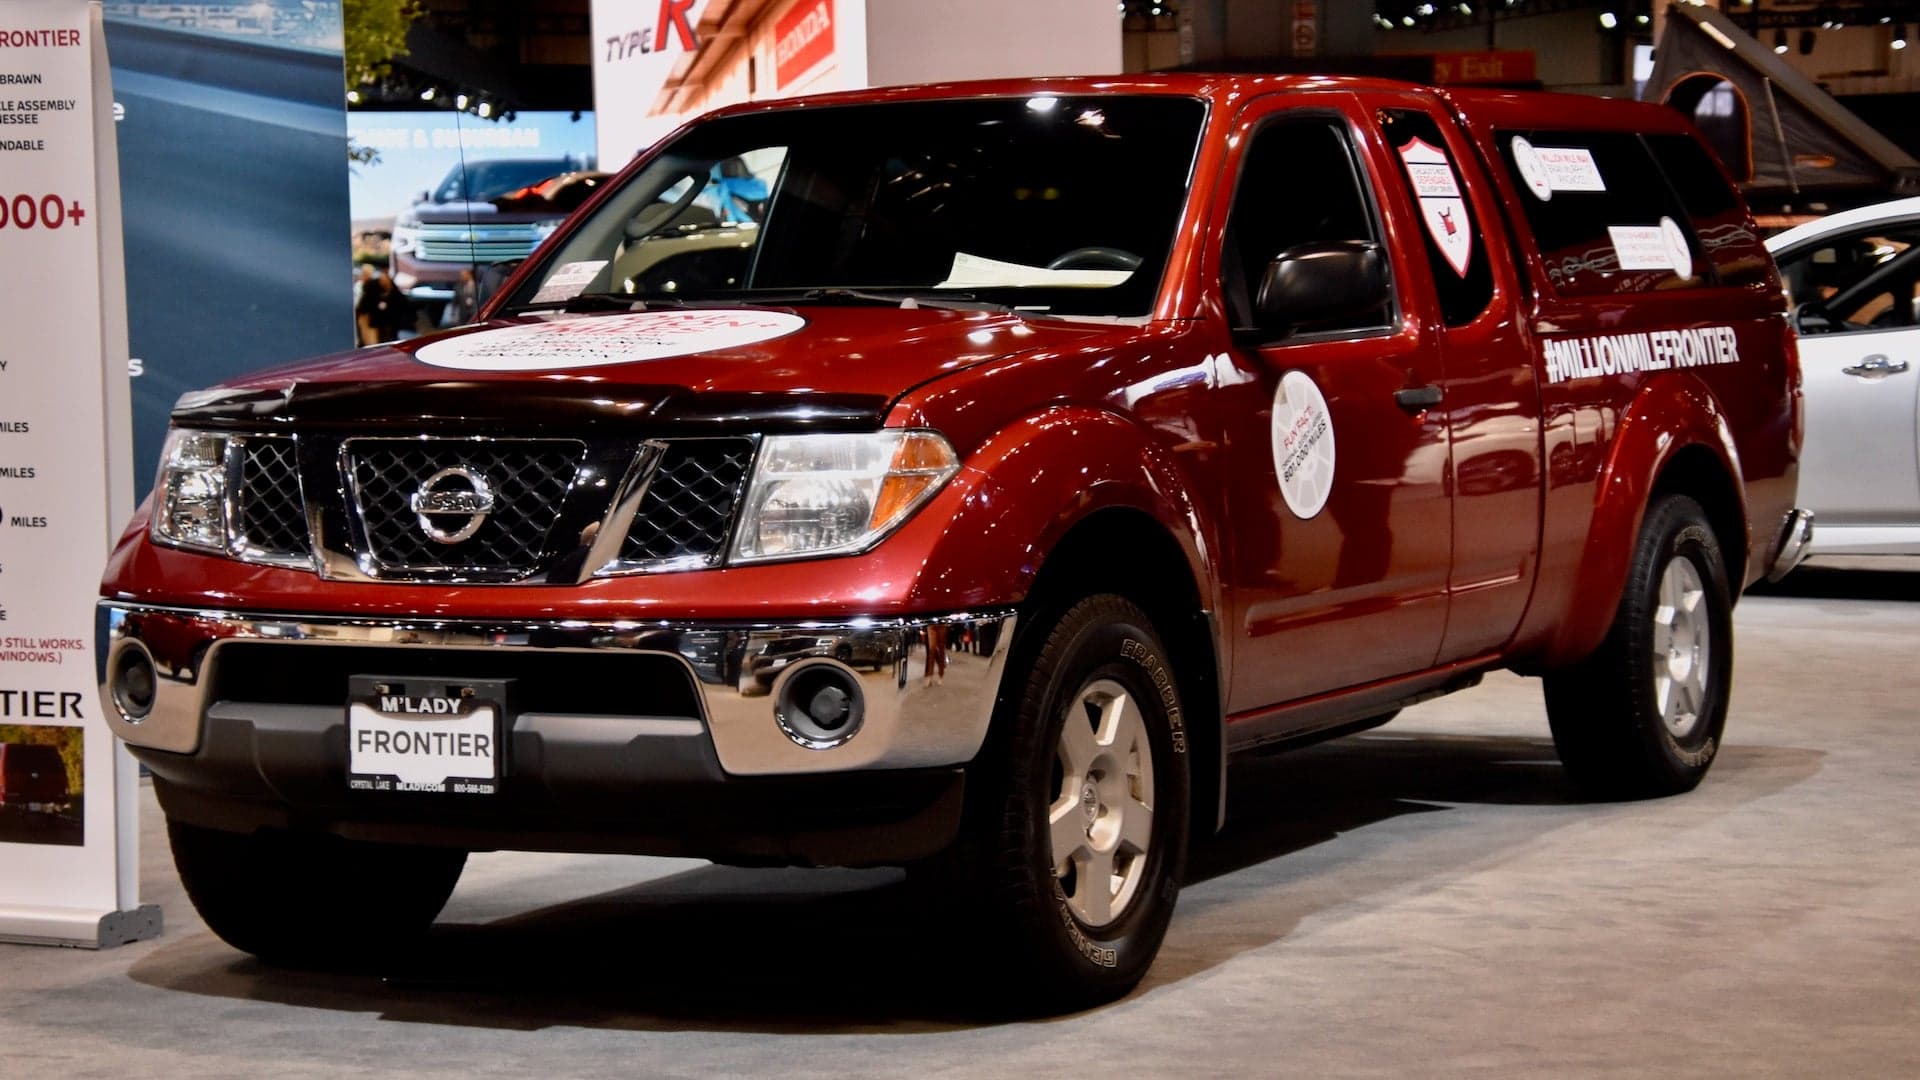 Nissan Giving Million-Mile Frontier Owner a Brand New Truck (That’s Pretty Much the Same)